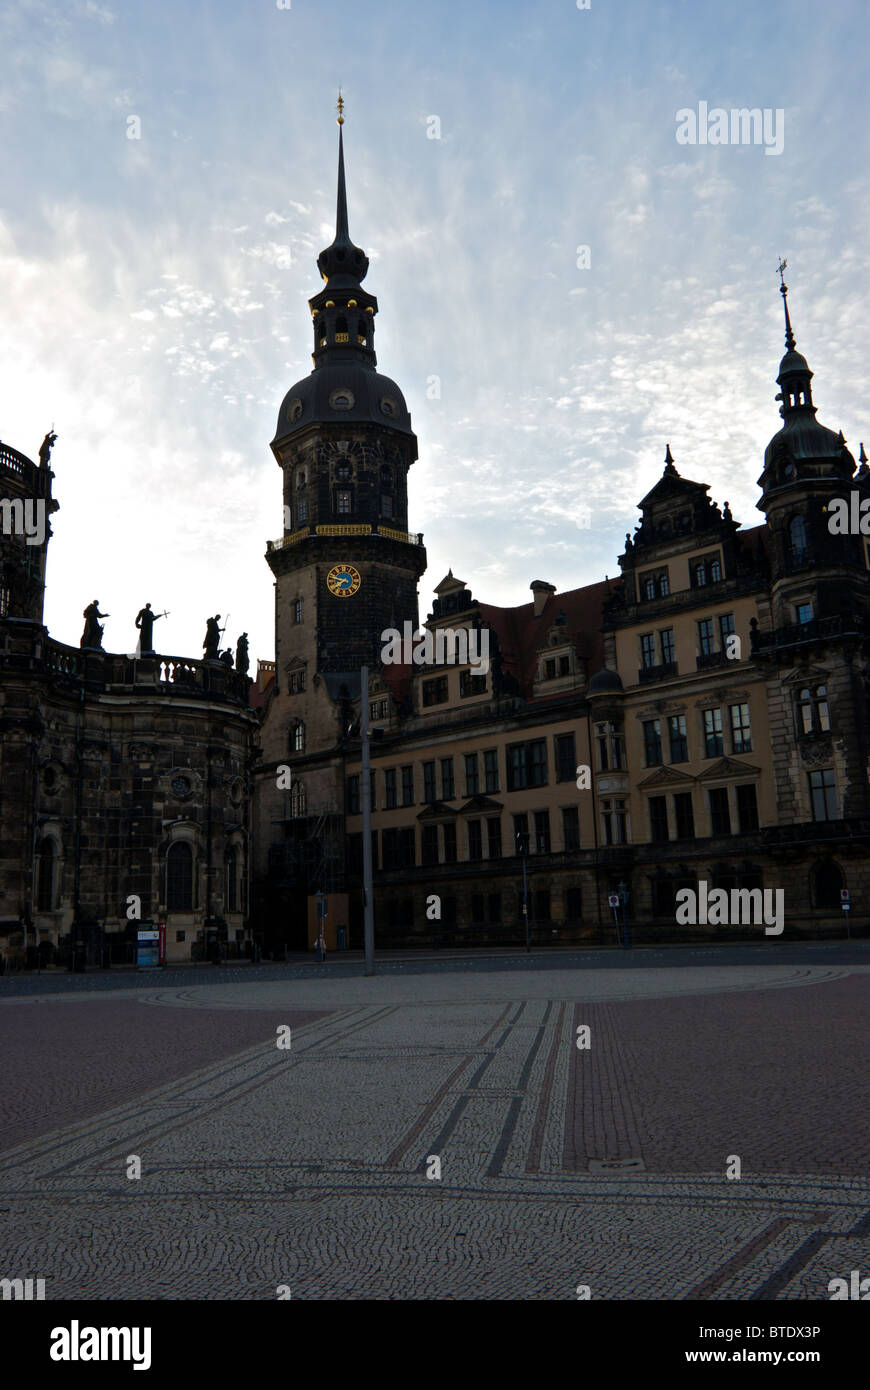 Royal palace steeples and expansive stone paved mosaic Theaterplatz plaza in historic old Altstadt Dresden at sunrise Stock Photo